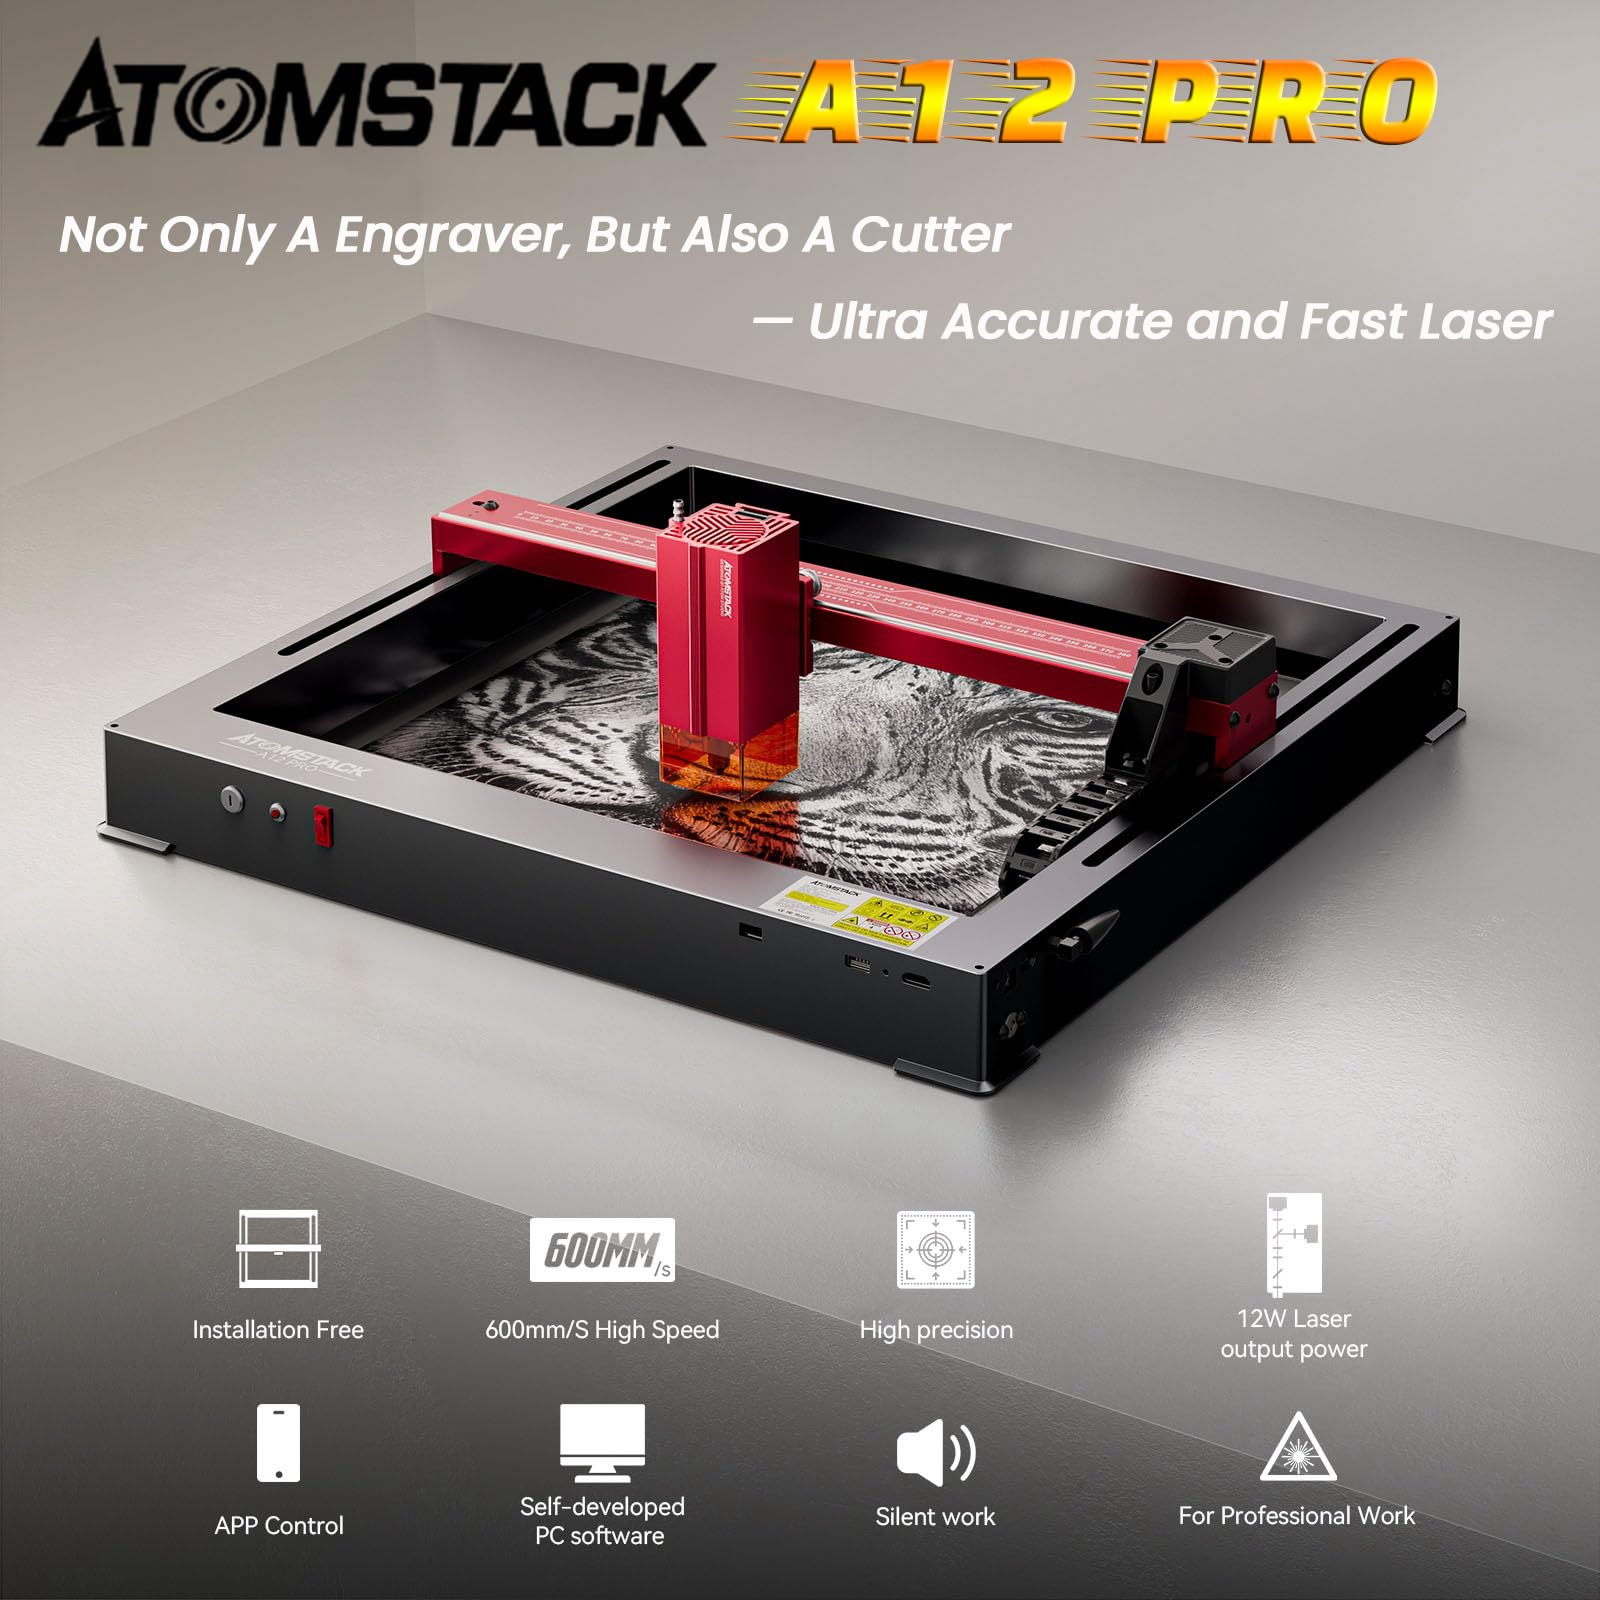 ATOMSTACK A12 Pro X12 PRO 12W Laser Engraving Machine Optical Power Laser Engraver Cutter Unibody Frame With F60 Double Pump Air Support